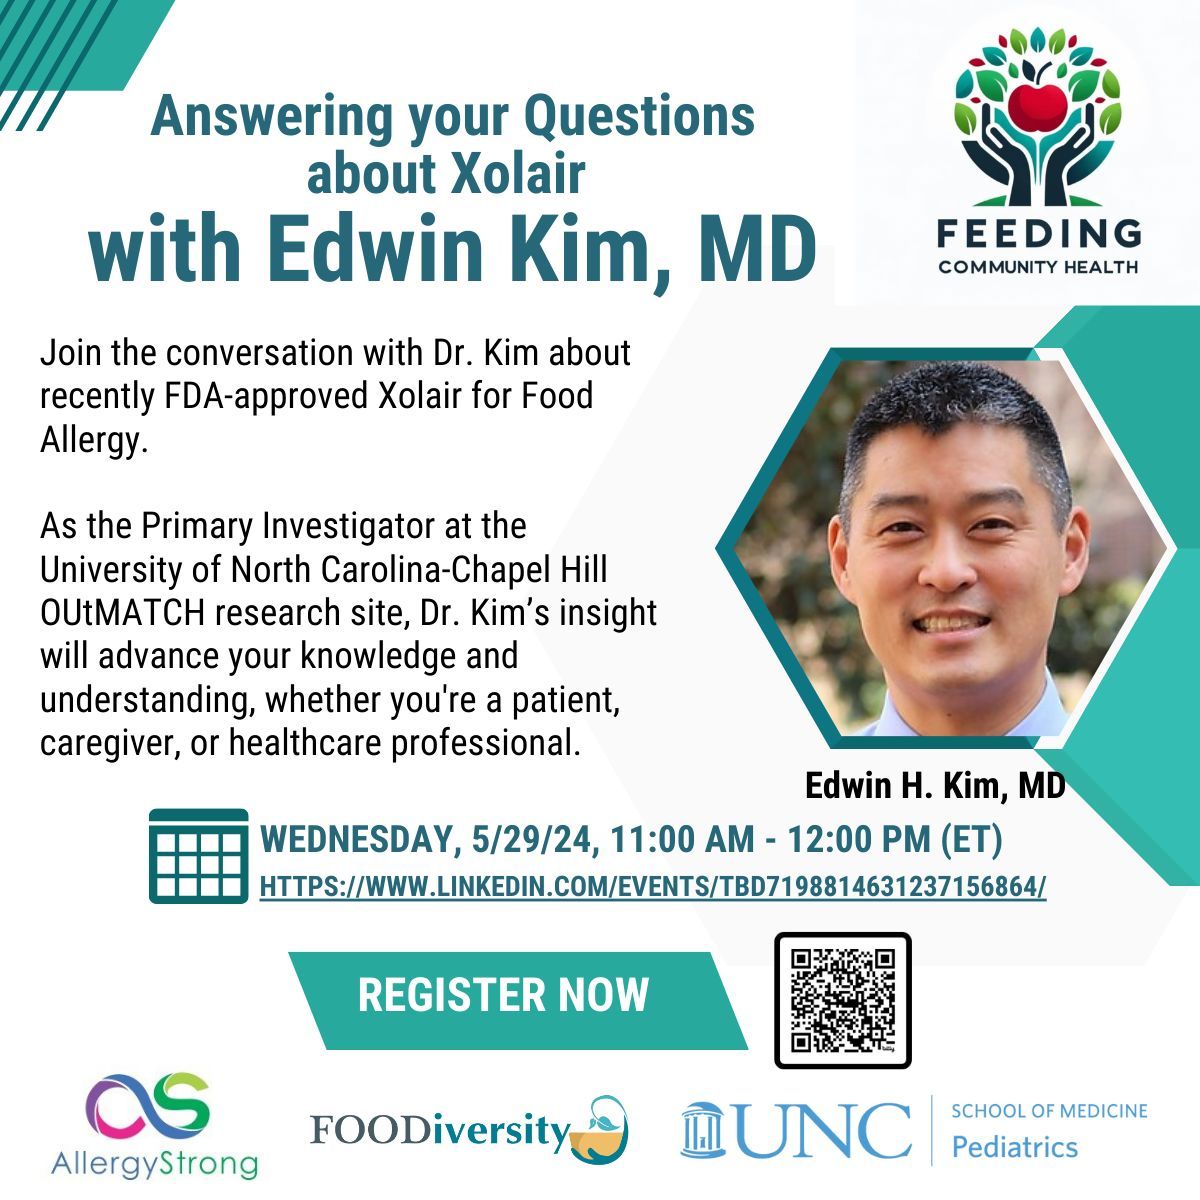 Join us this upcoming week to discuss Xolair - a new treatment for food allergies. We welcome people with food allergies, caregivers, and healthcare providers to learn the ins and outs of Xolair and hear answers to your questions. Registration is free! @FeedingCommunityHealth